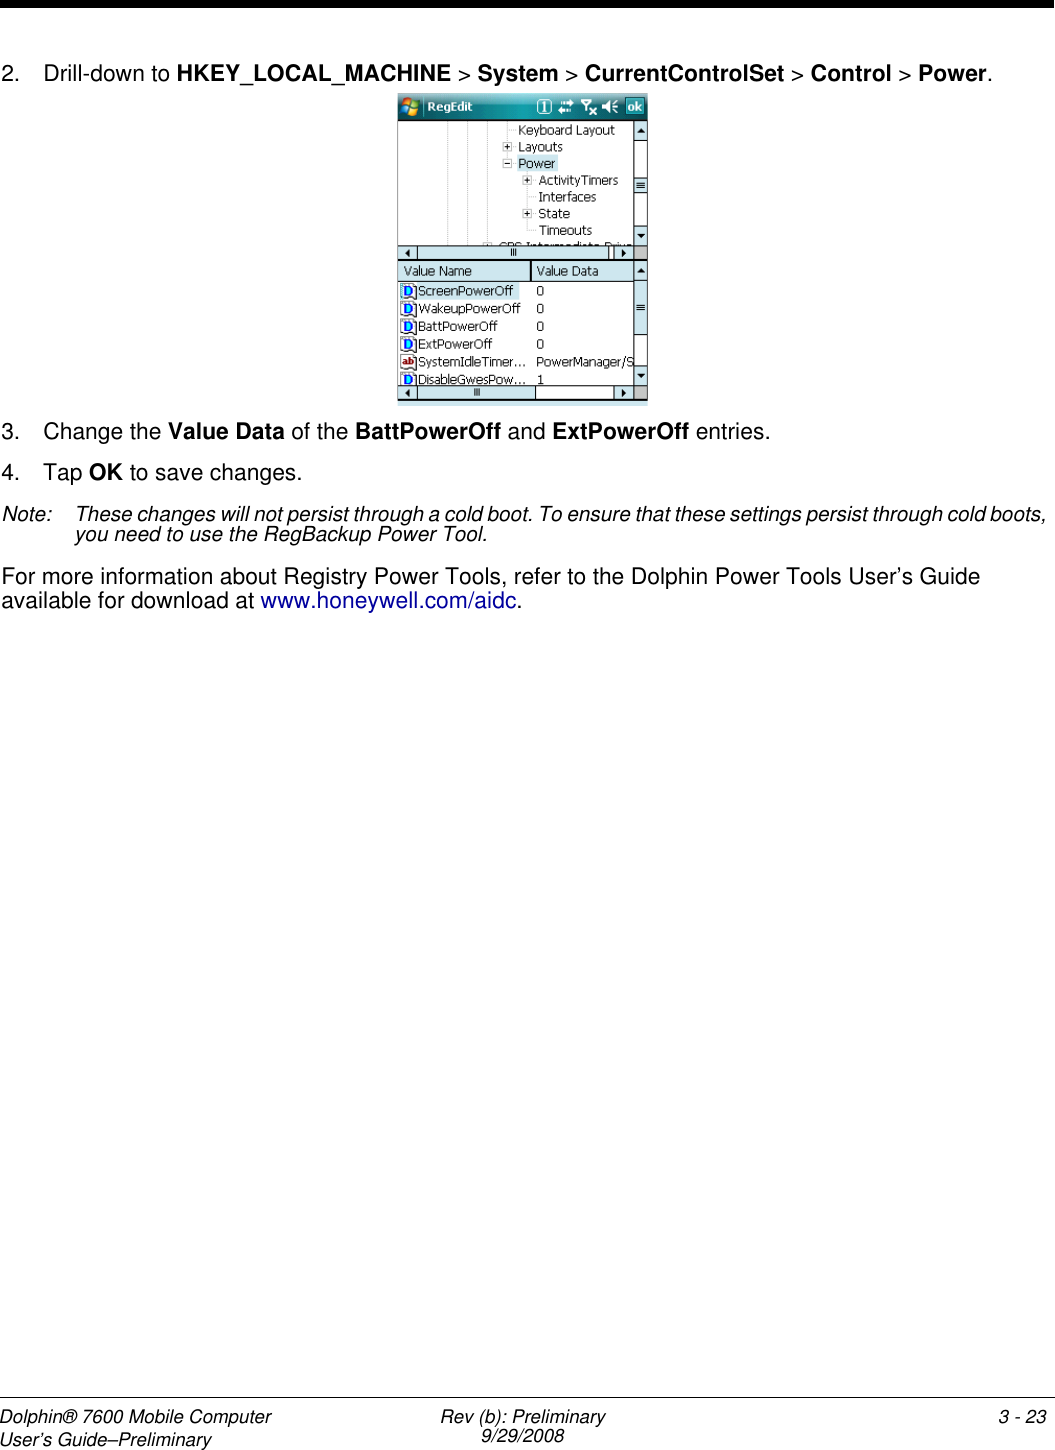 Dolphin® 7600 Mobile Computer User’s Guide–Preliminary Rev (b): Preliminary9/29/2008 3 - 232. Drill-down to HKEY_LOCAL_MACHINE &gt; System &gt; CurrentControlSet &gt; Control &gt; Power. 3. Change the Value Data of the BattPowerOff and ExtPowerOff entries. 4. Tap OK to save changes.Note: These changes will not persist through a cold boot. To ensure that these settings persist through cold boots, you need to use the RegBackup Power Tool.For more information about Registry Power Tools, refer to the Dolphin Power Tools User’s Guide available for download at www.honeywell.com/aidc.